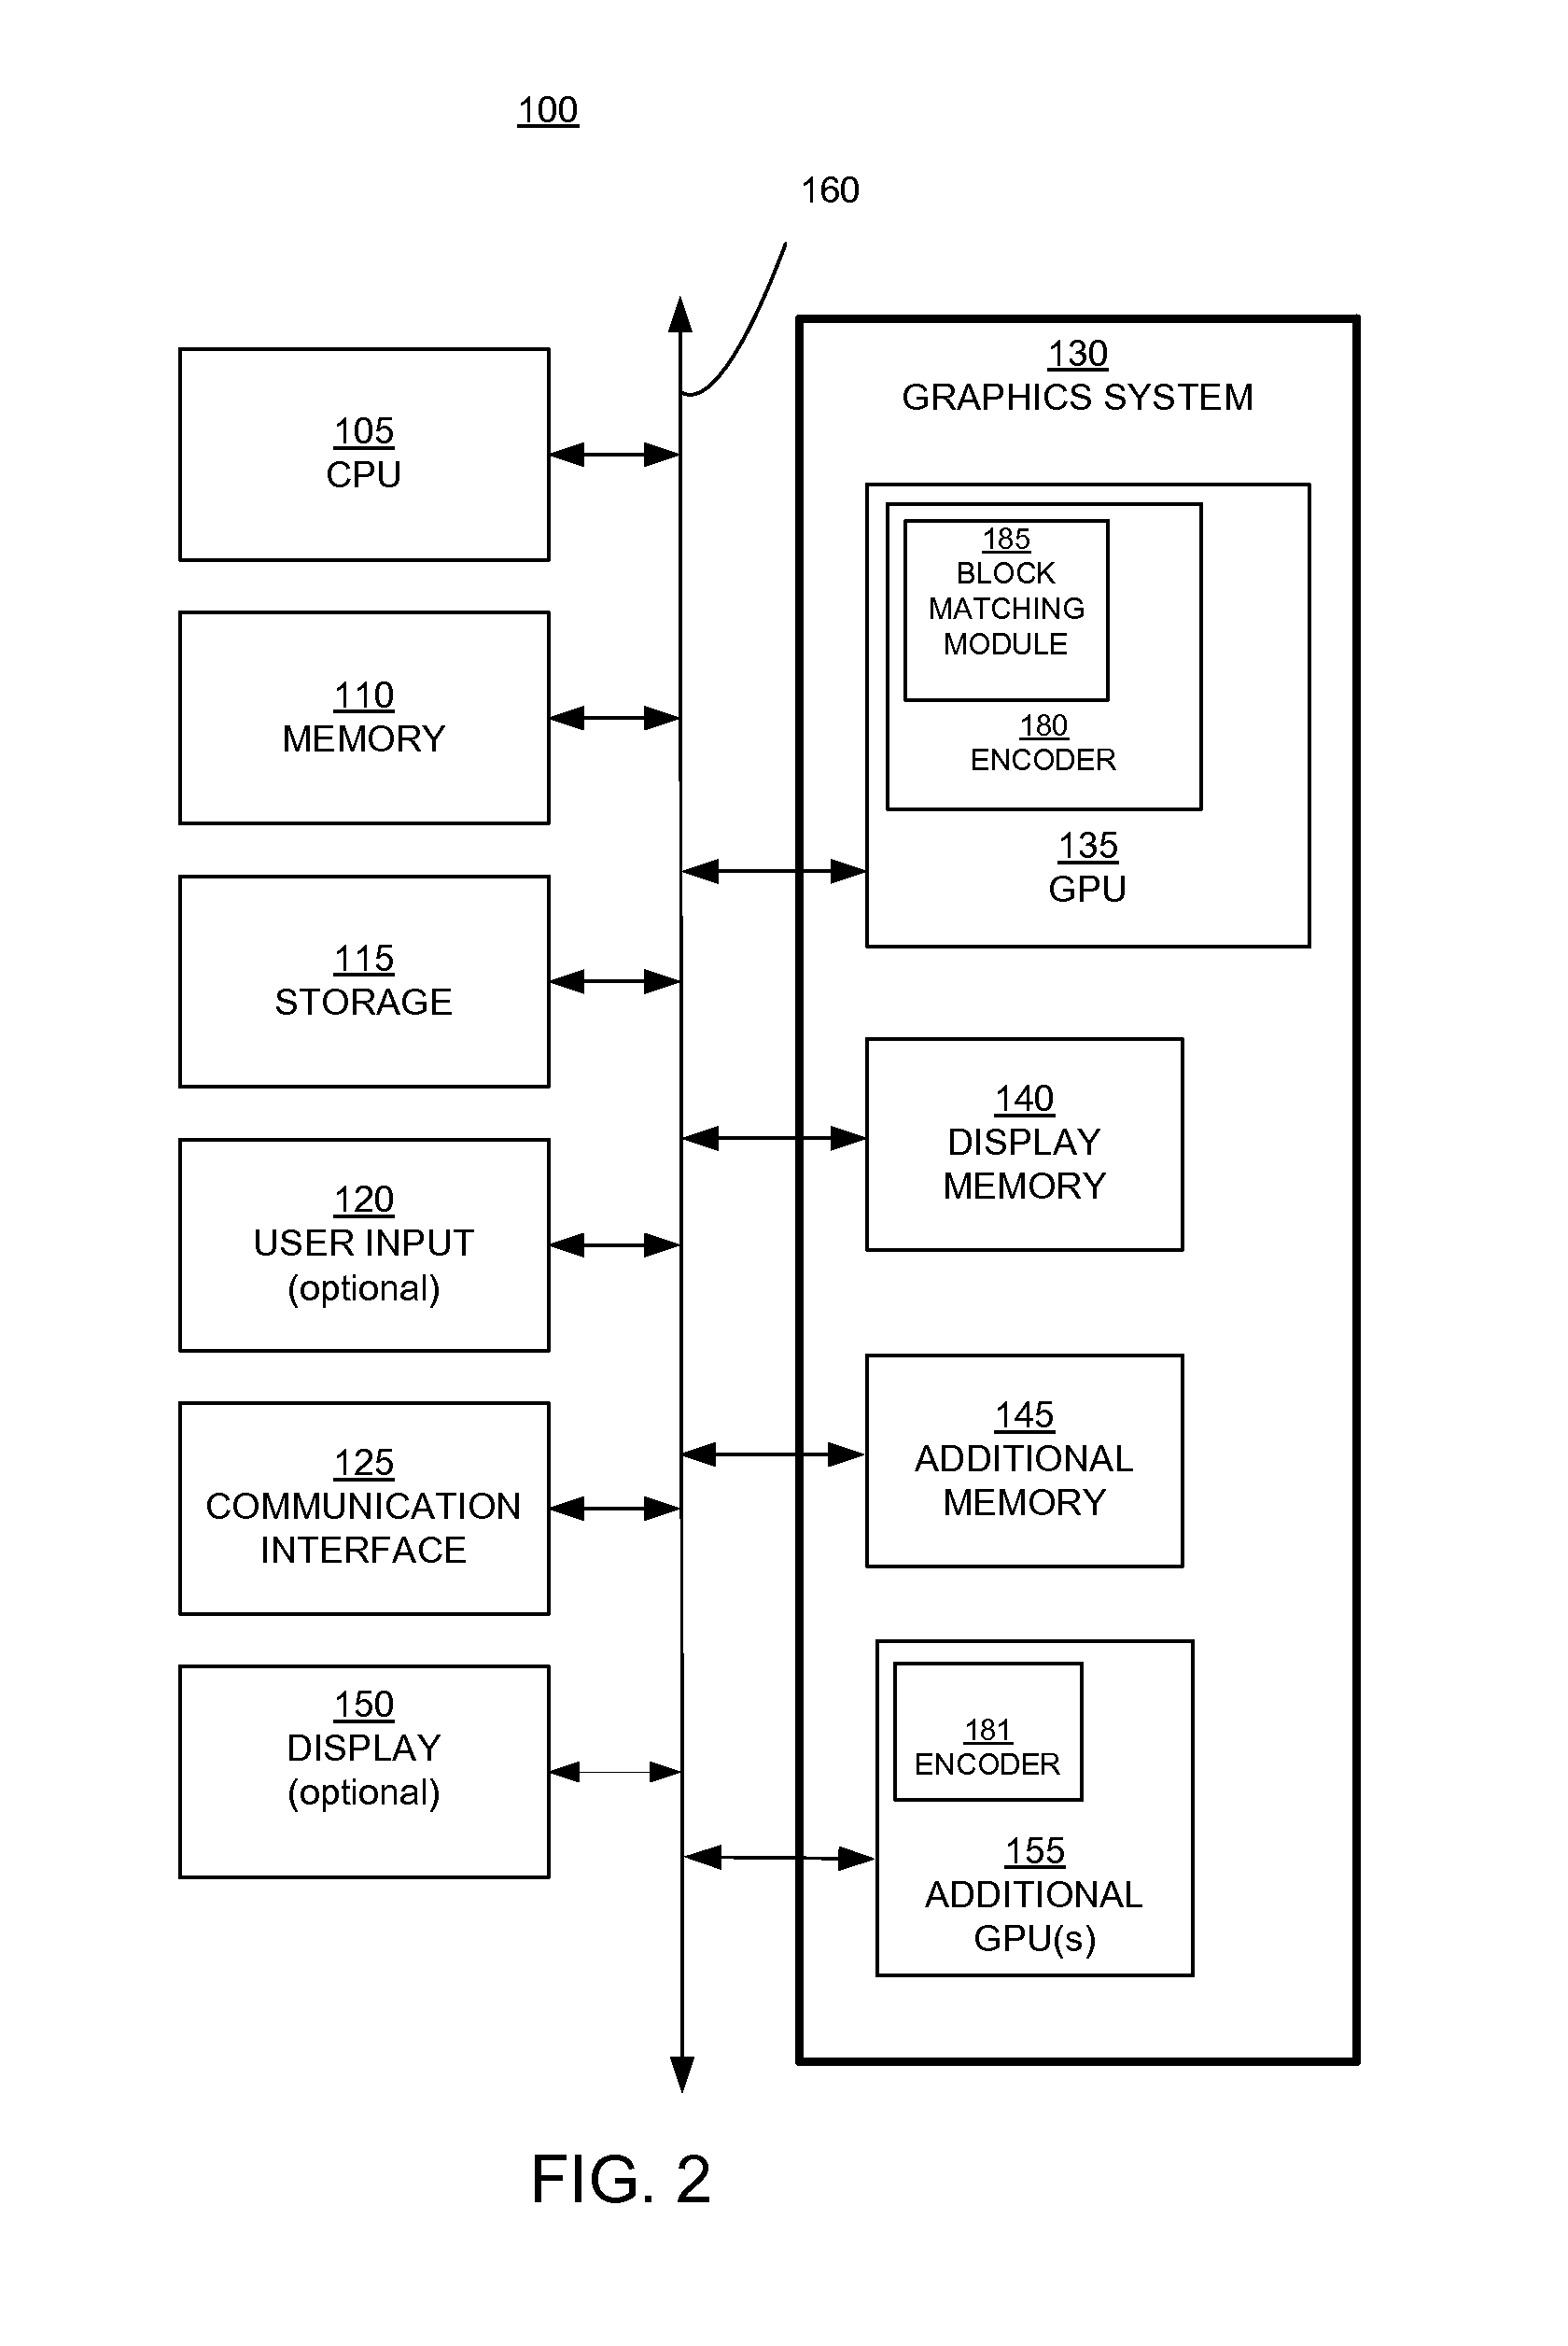 Apparatus and method for enhancing motion estimation based on user input